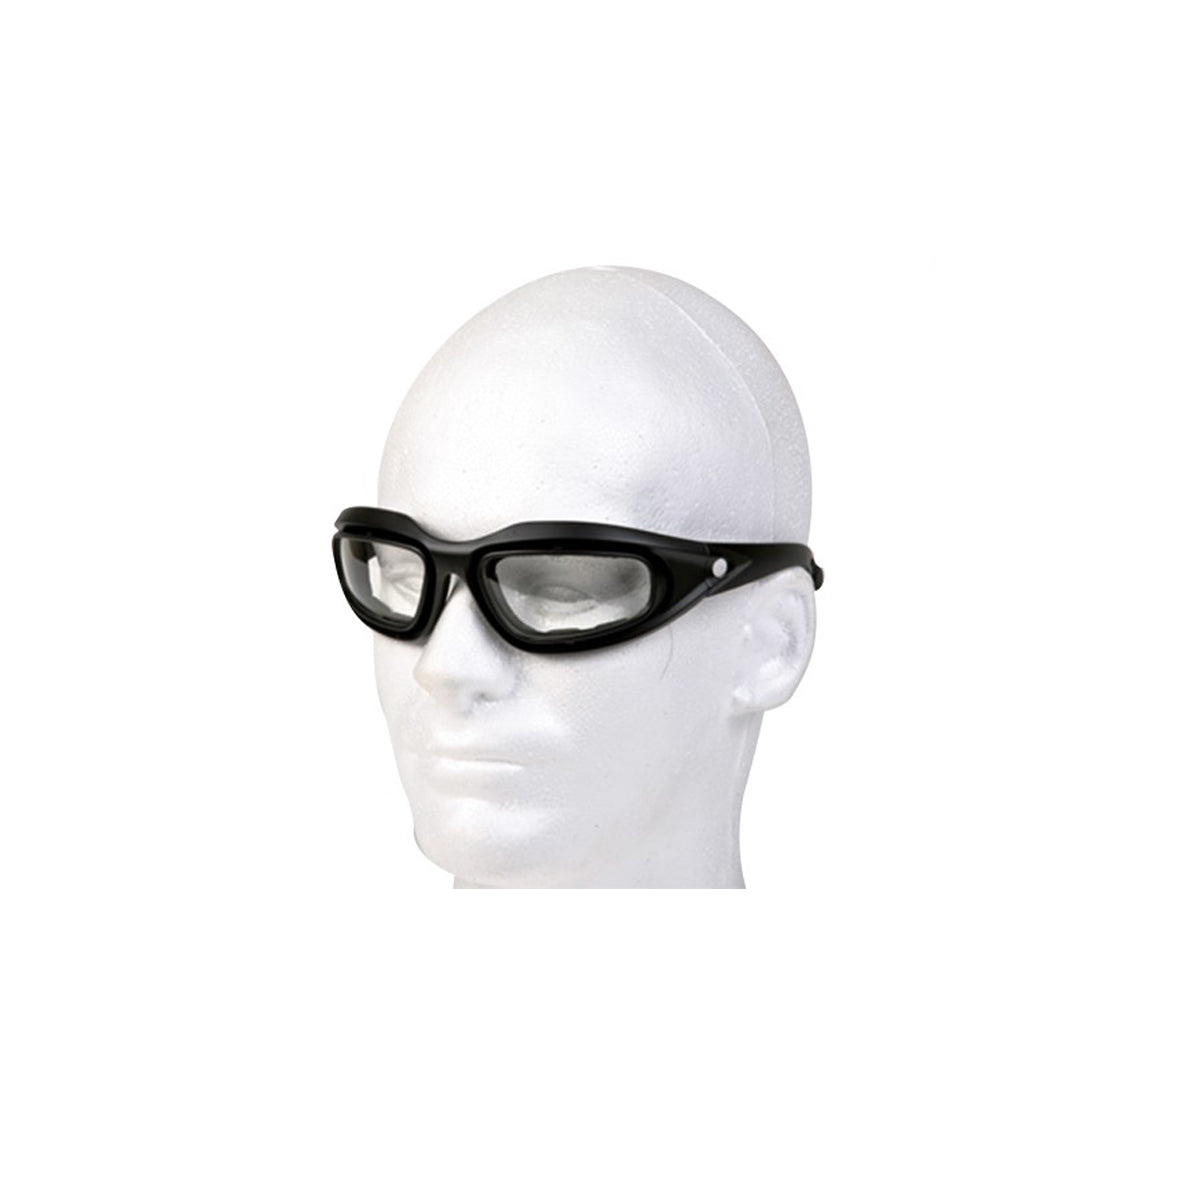 Riding Glasses with Clear Lens